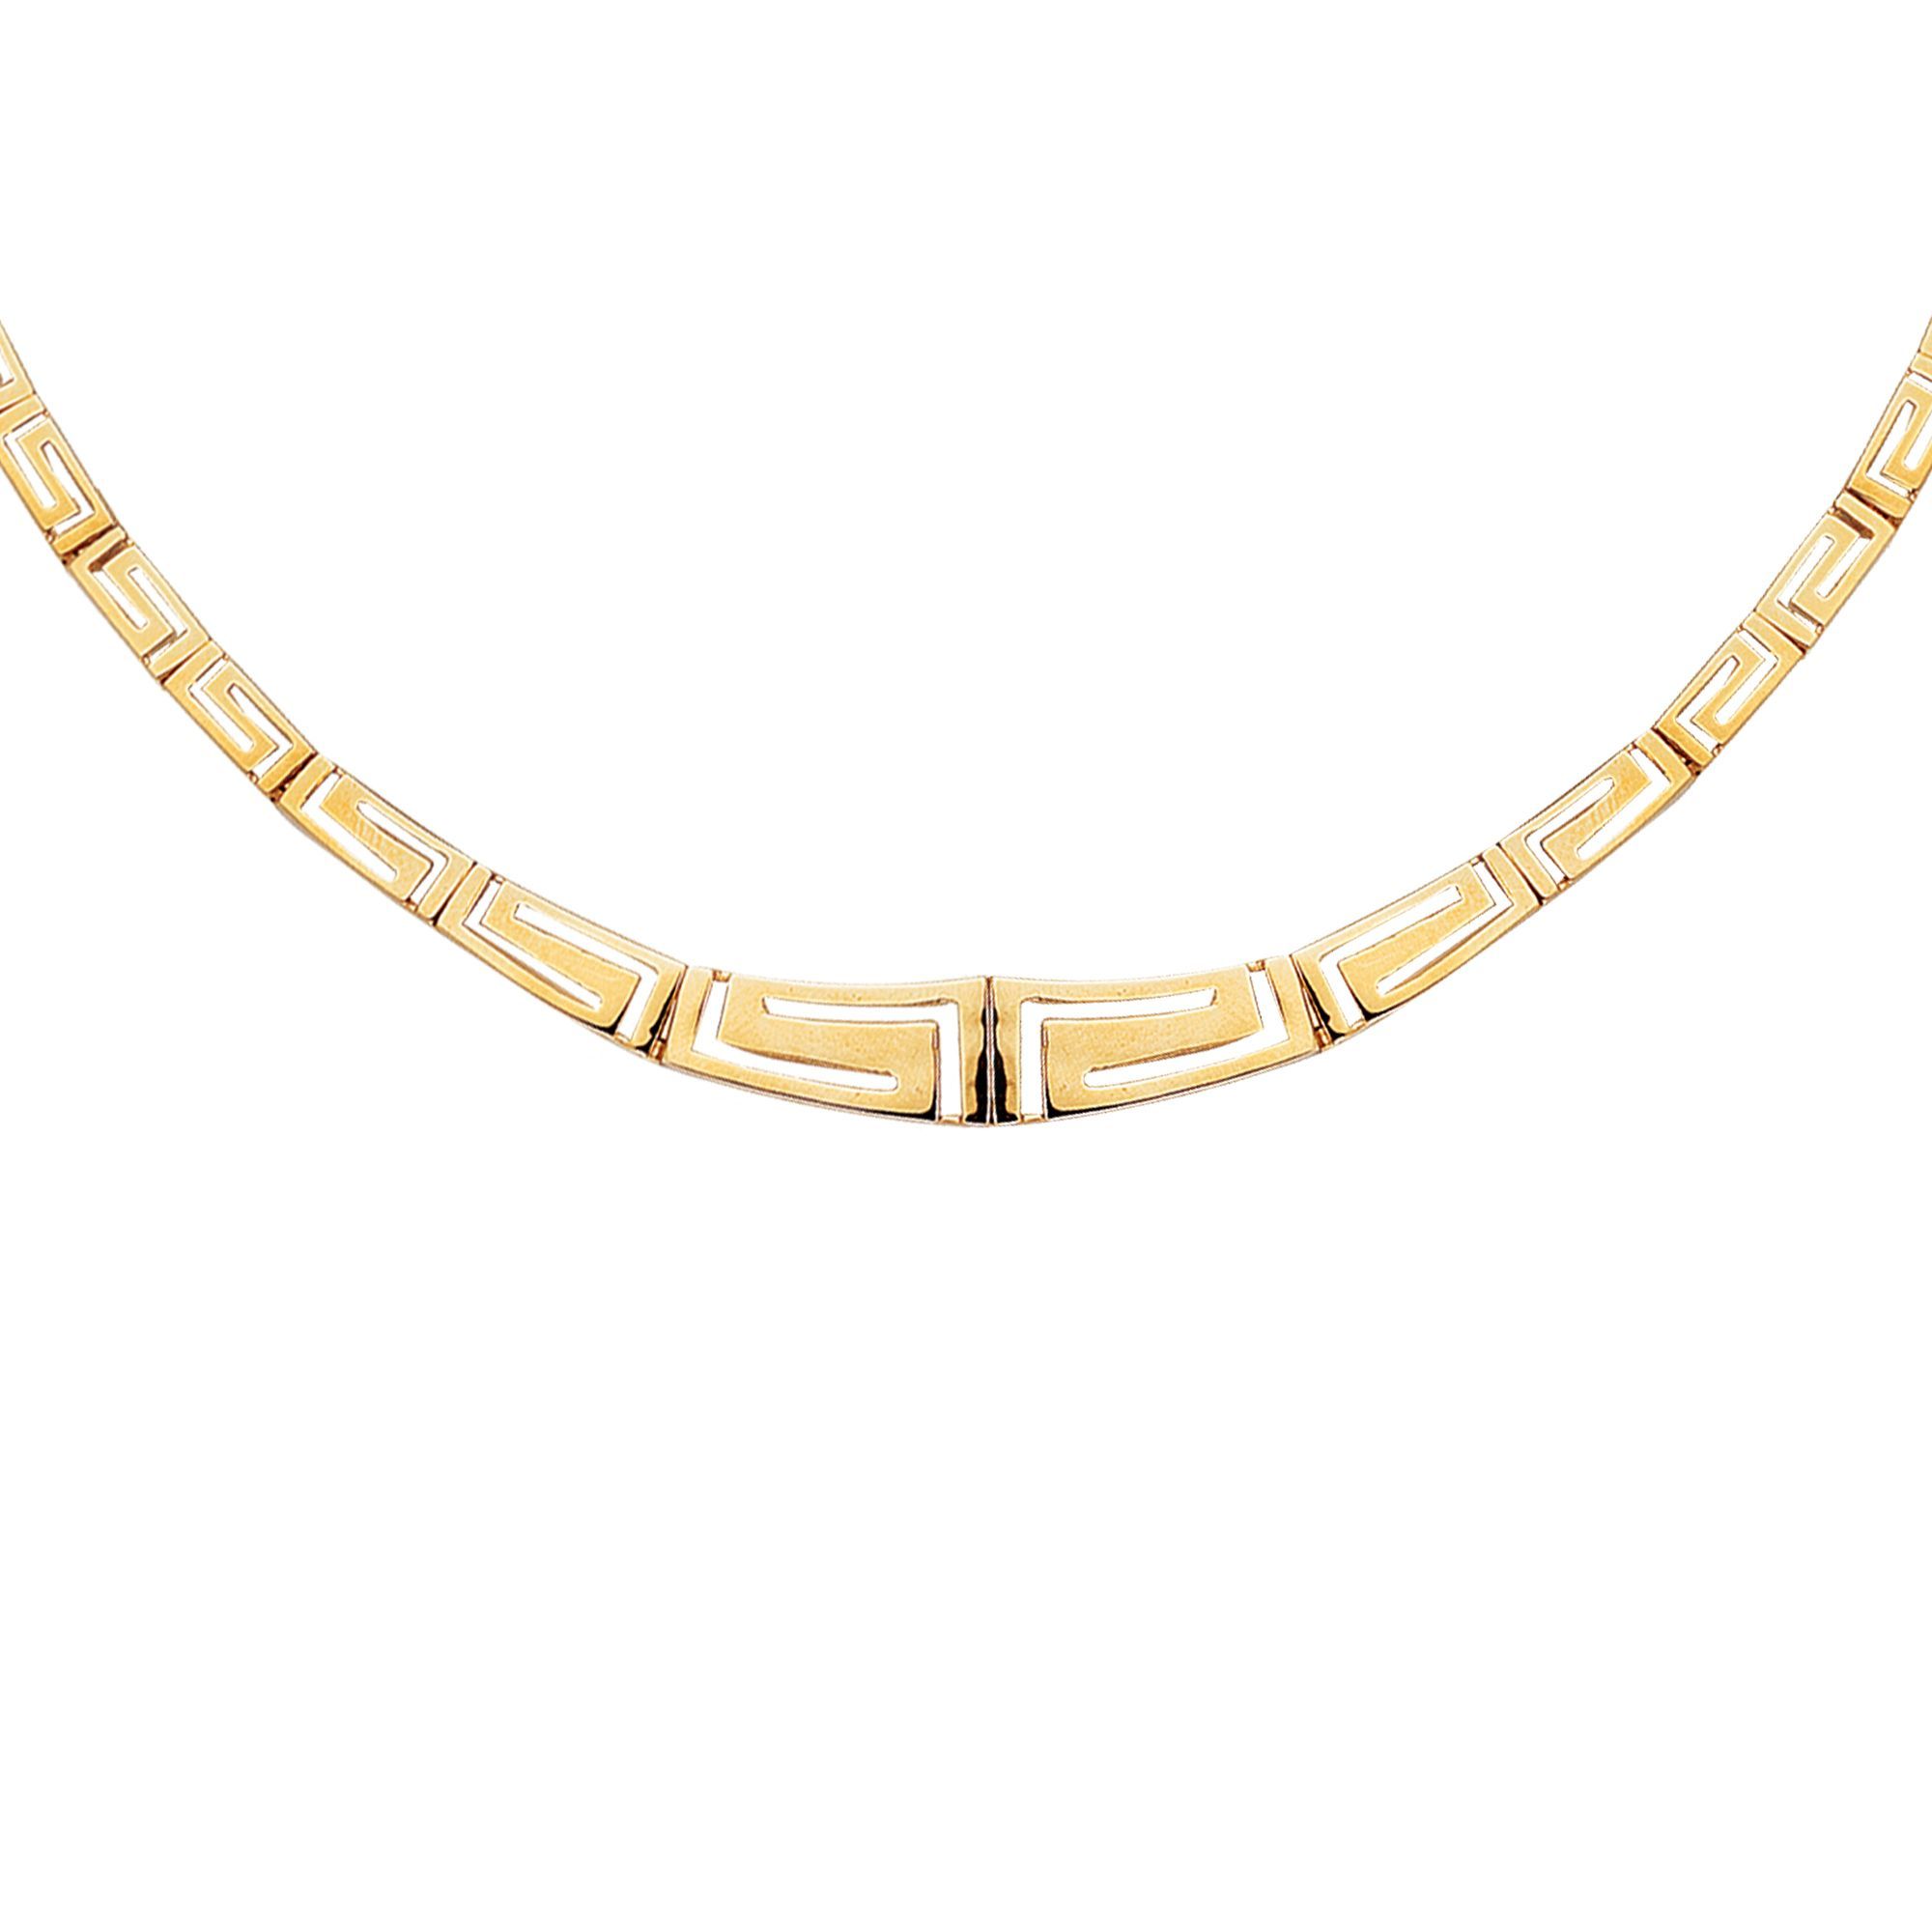 MUSEUM REPRODUCTIONS Classical Meander Gold Link Necklace - Inspired by  Greek Architecture - 16